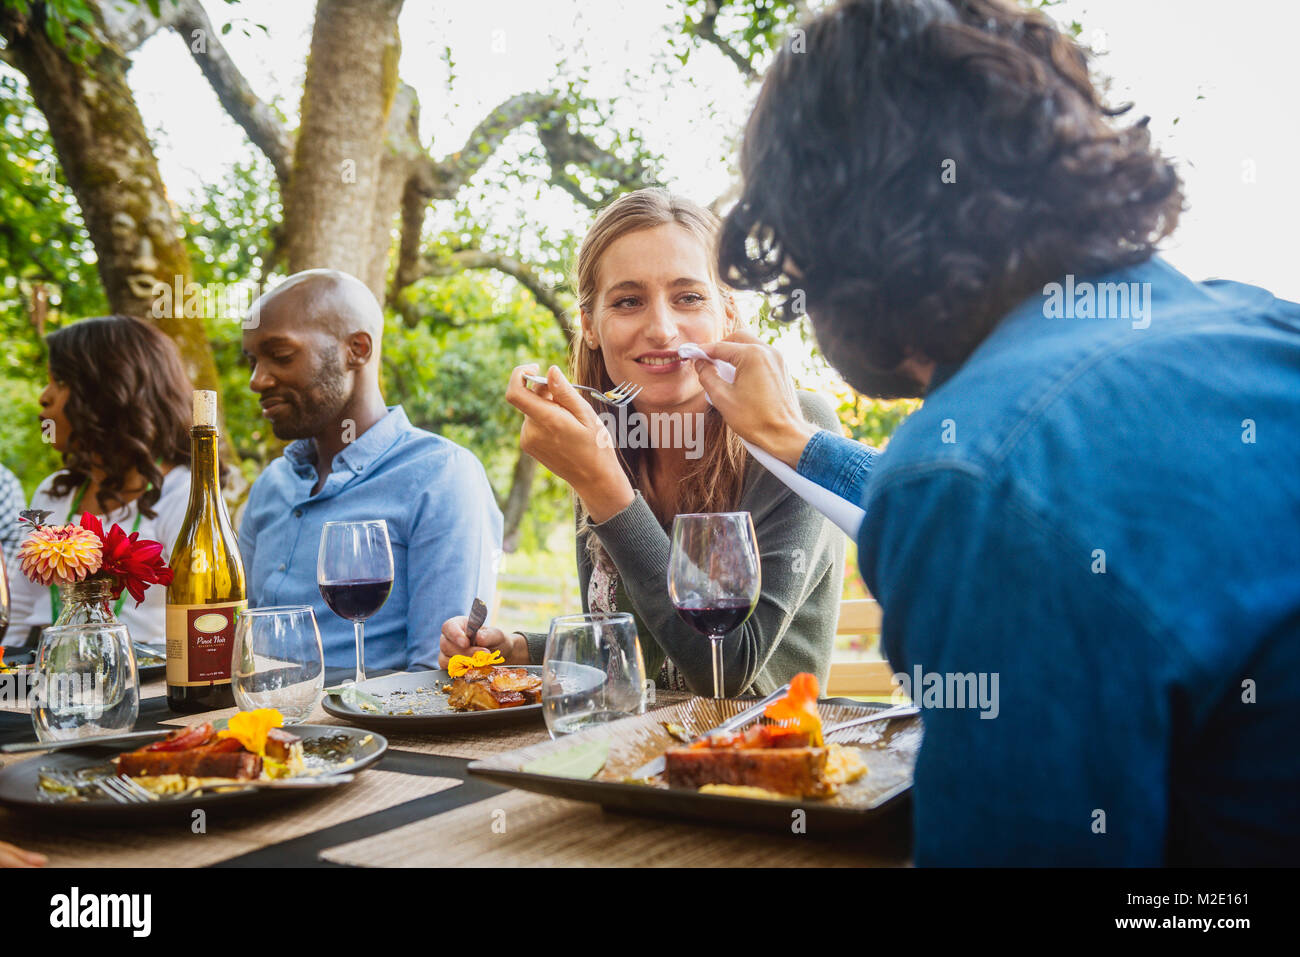 Man feeding food to woman at party outdoors Stock Photo